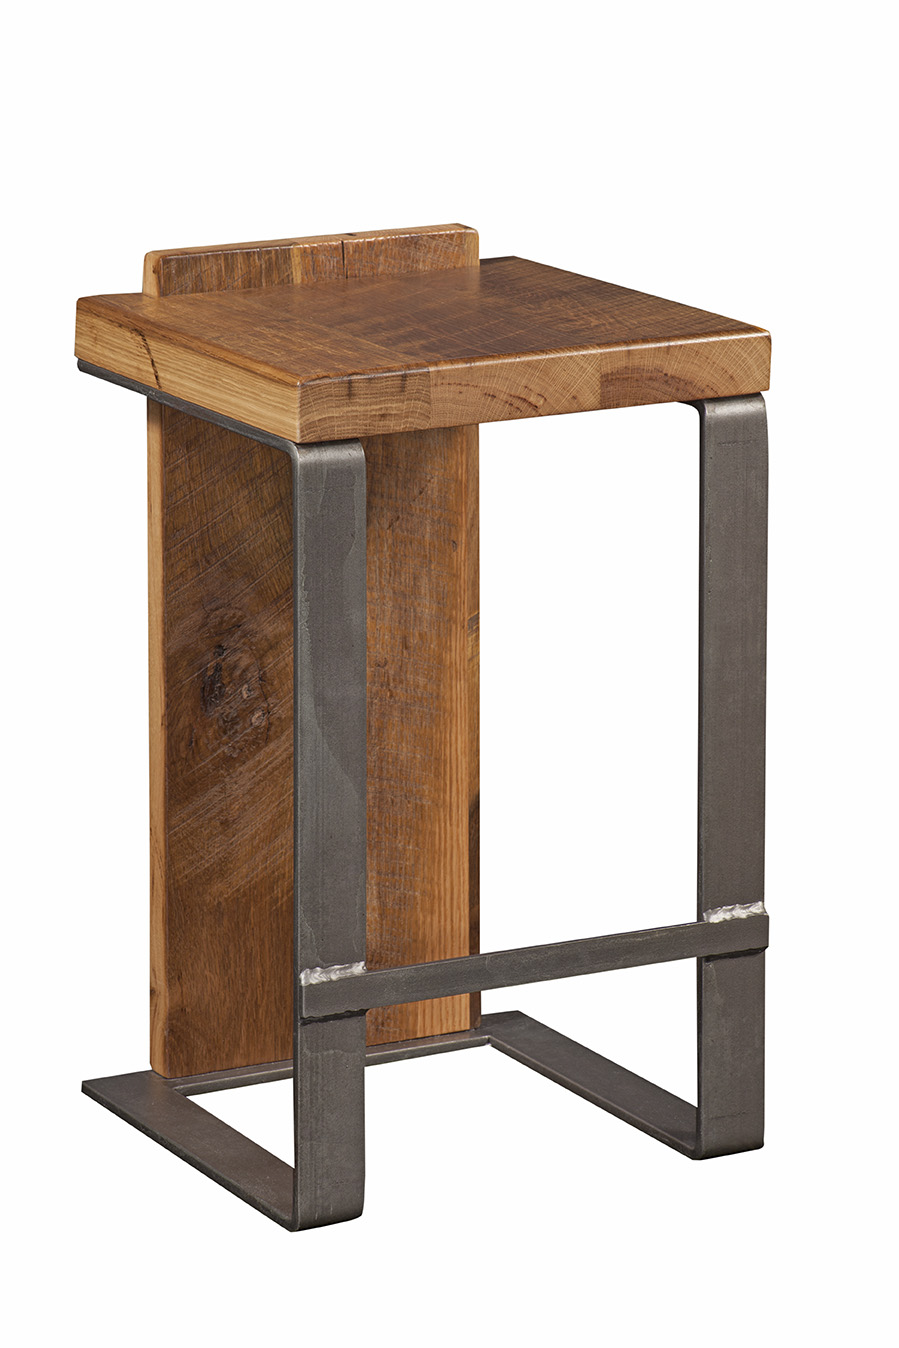 24" Industrial Style Natural Reclaimed Oak And Steel Bar Stool